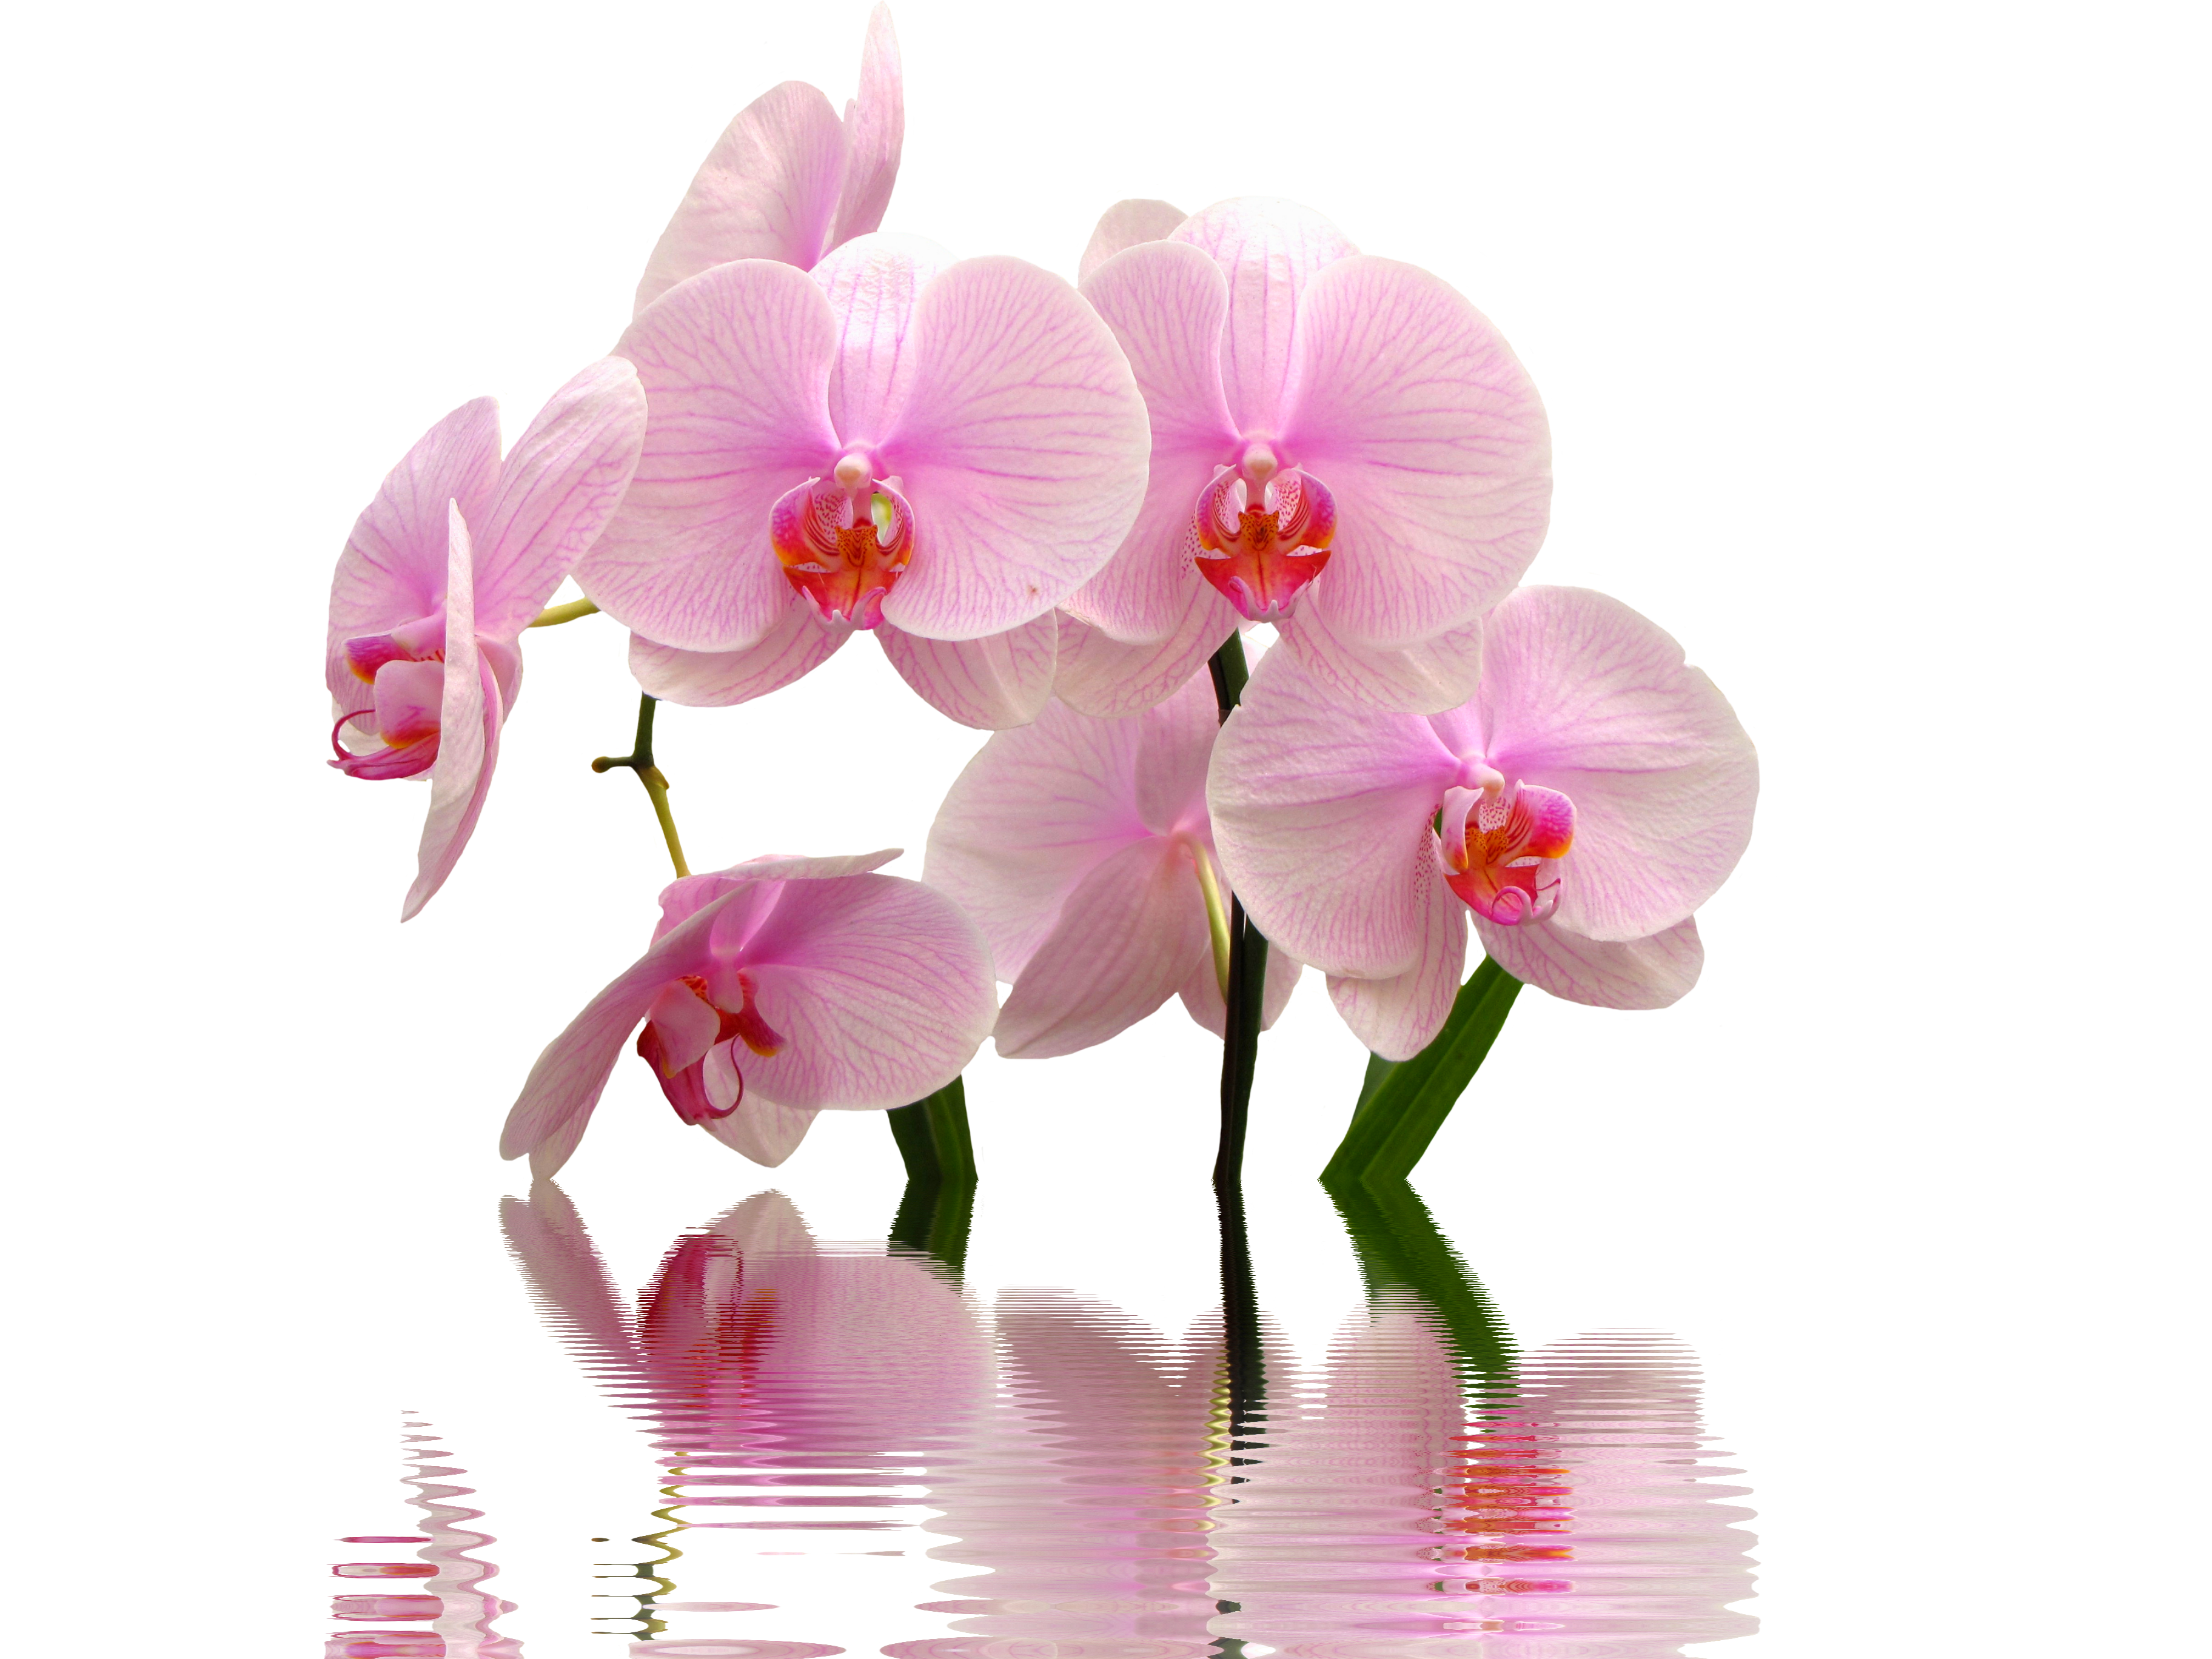 Orchid PNG Image